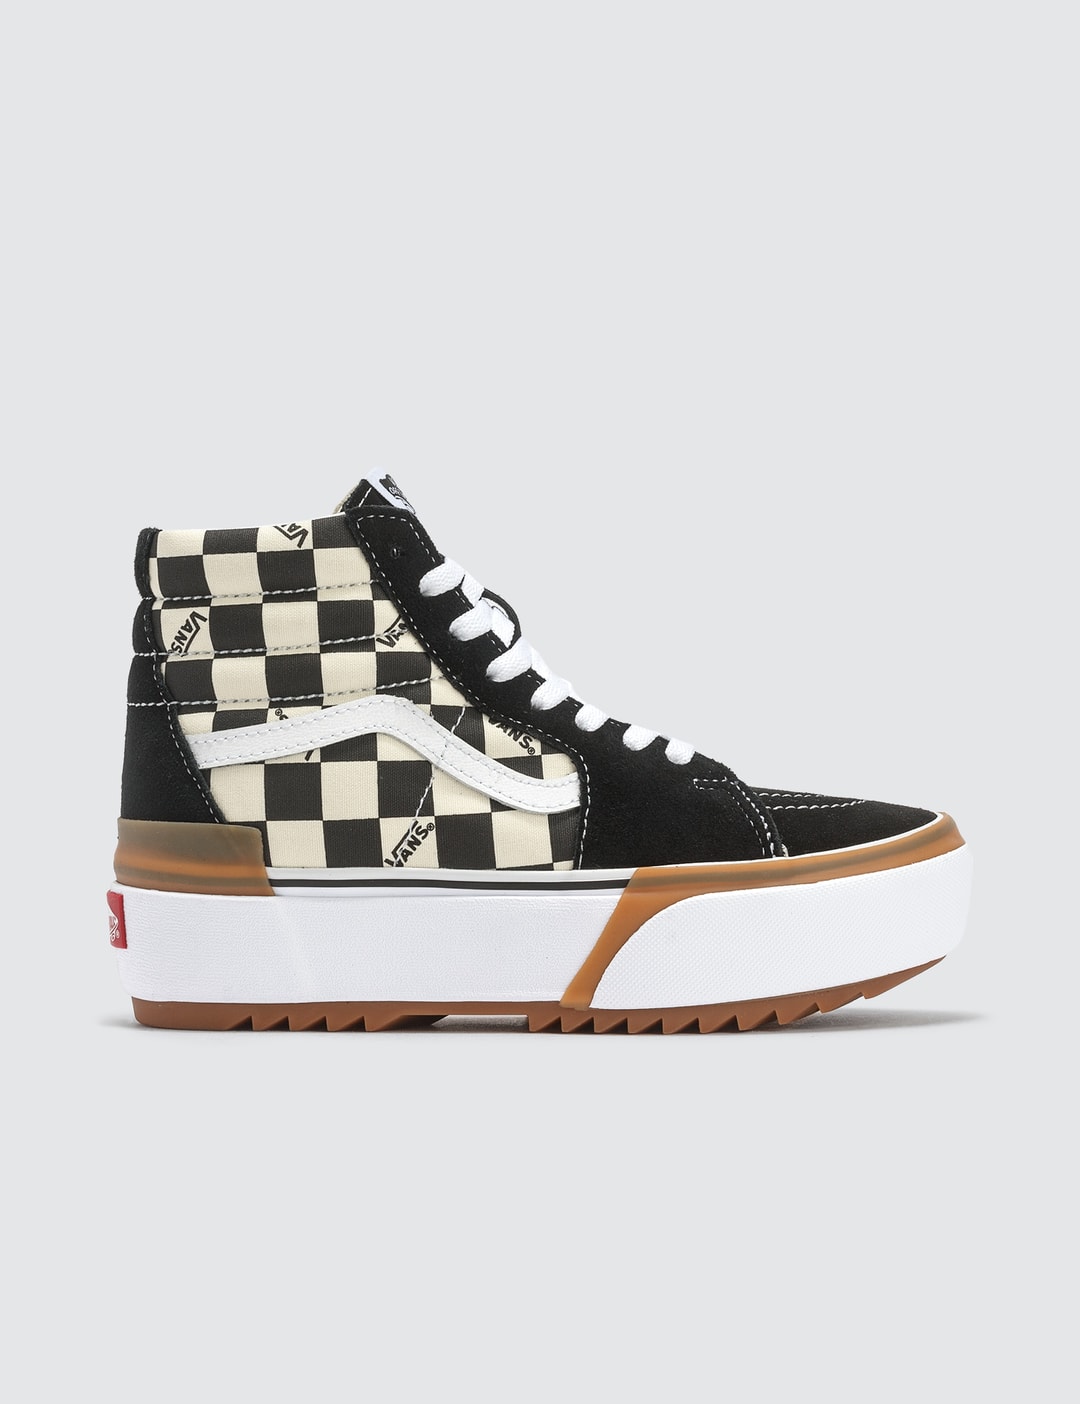 Vans SK8-Hi Stacked | HBX - Globally Curated Fashion and Lifestyle by Hypebeast